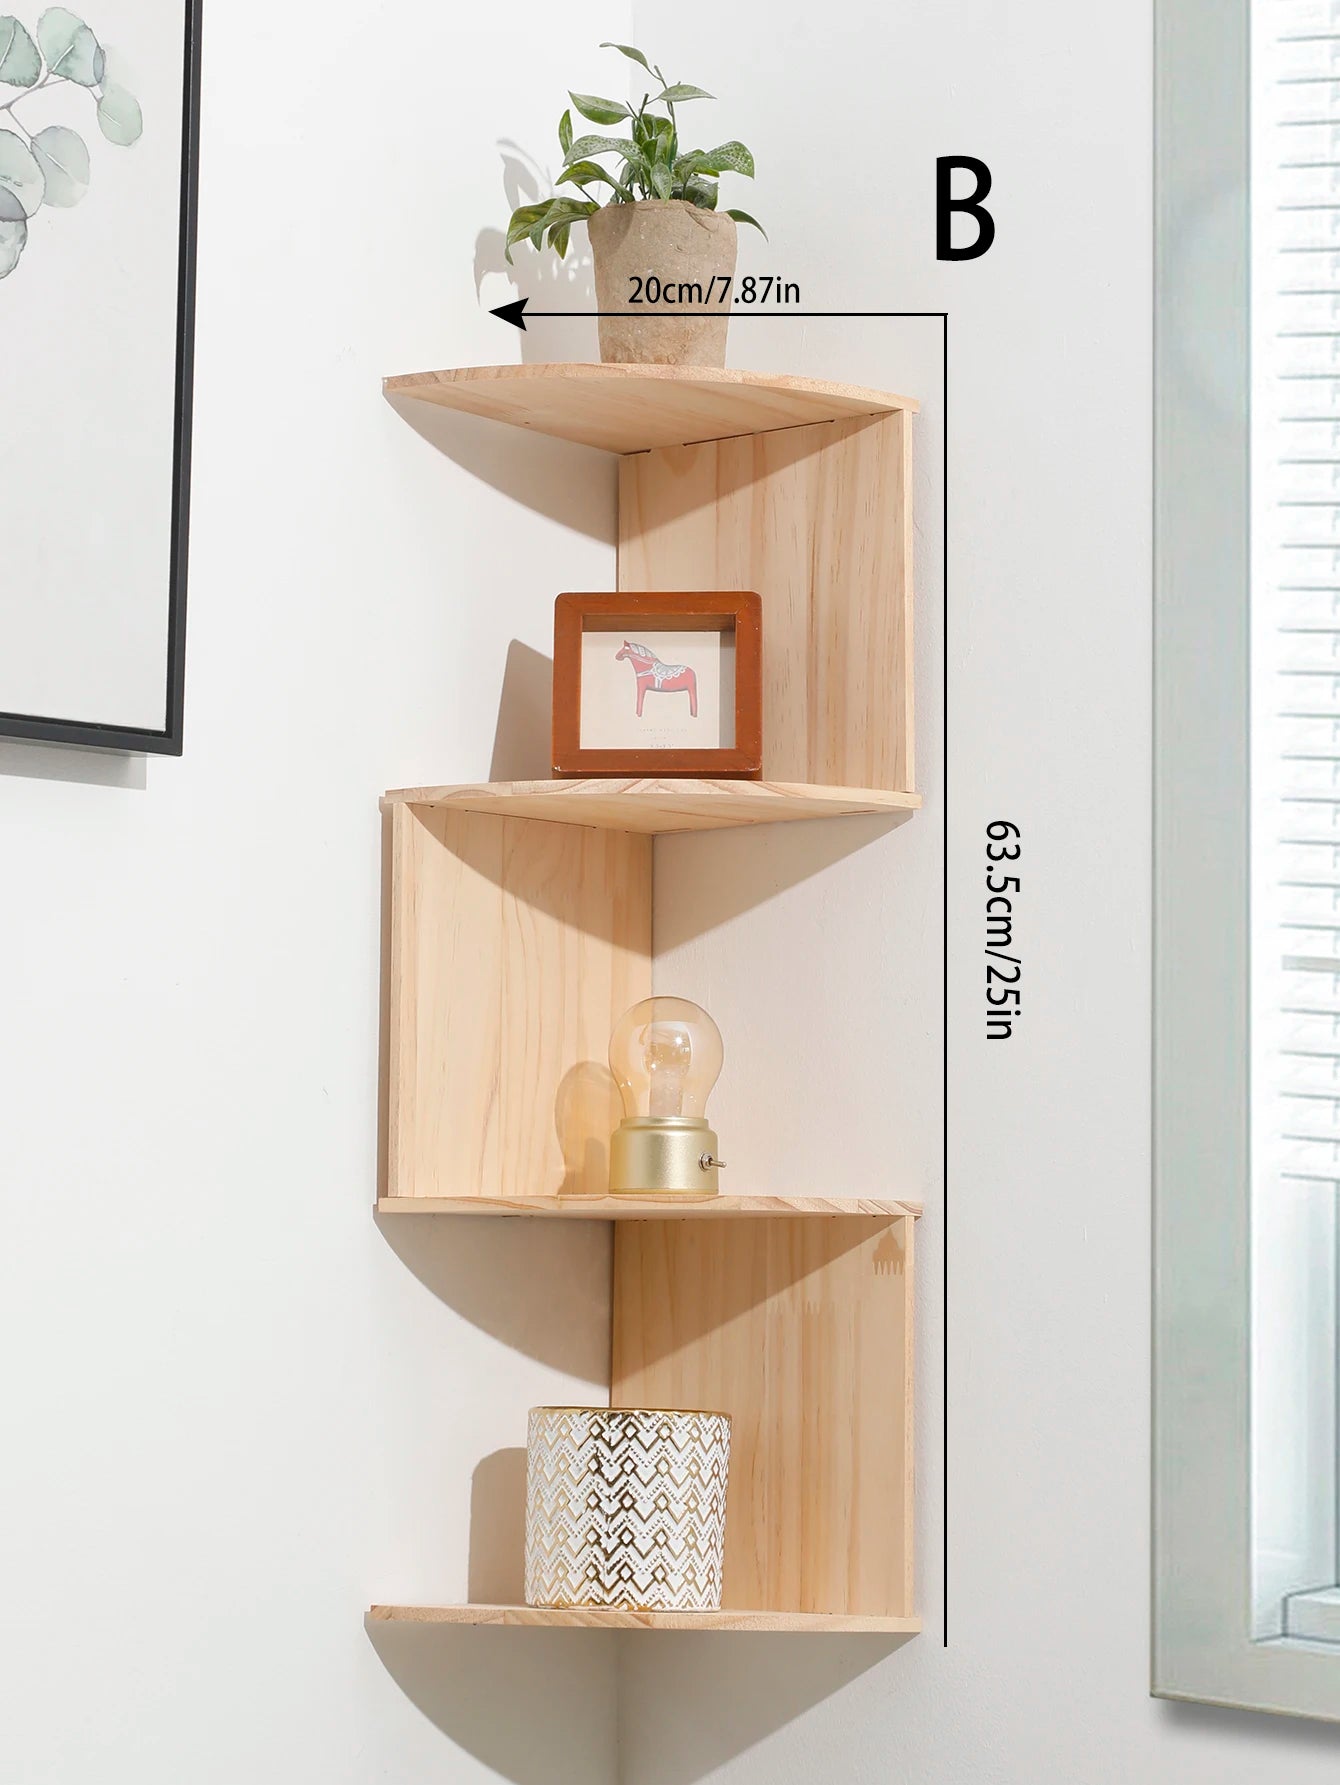 Floating Shelves Home Organizers